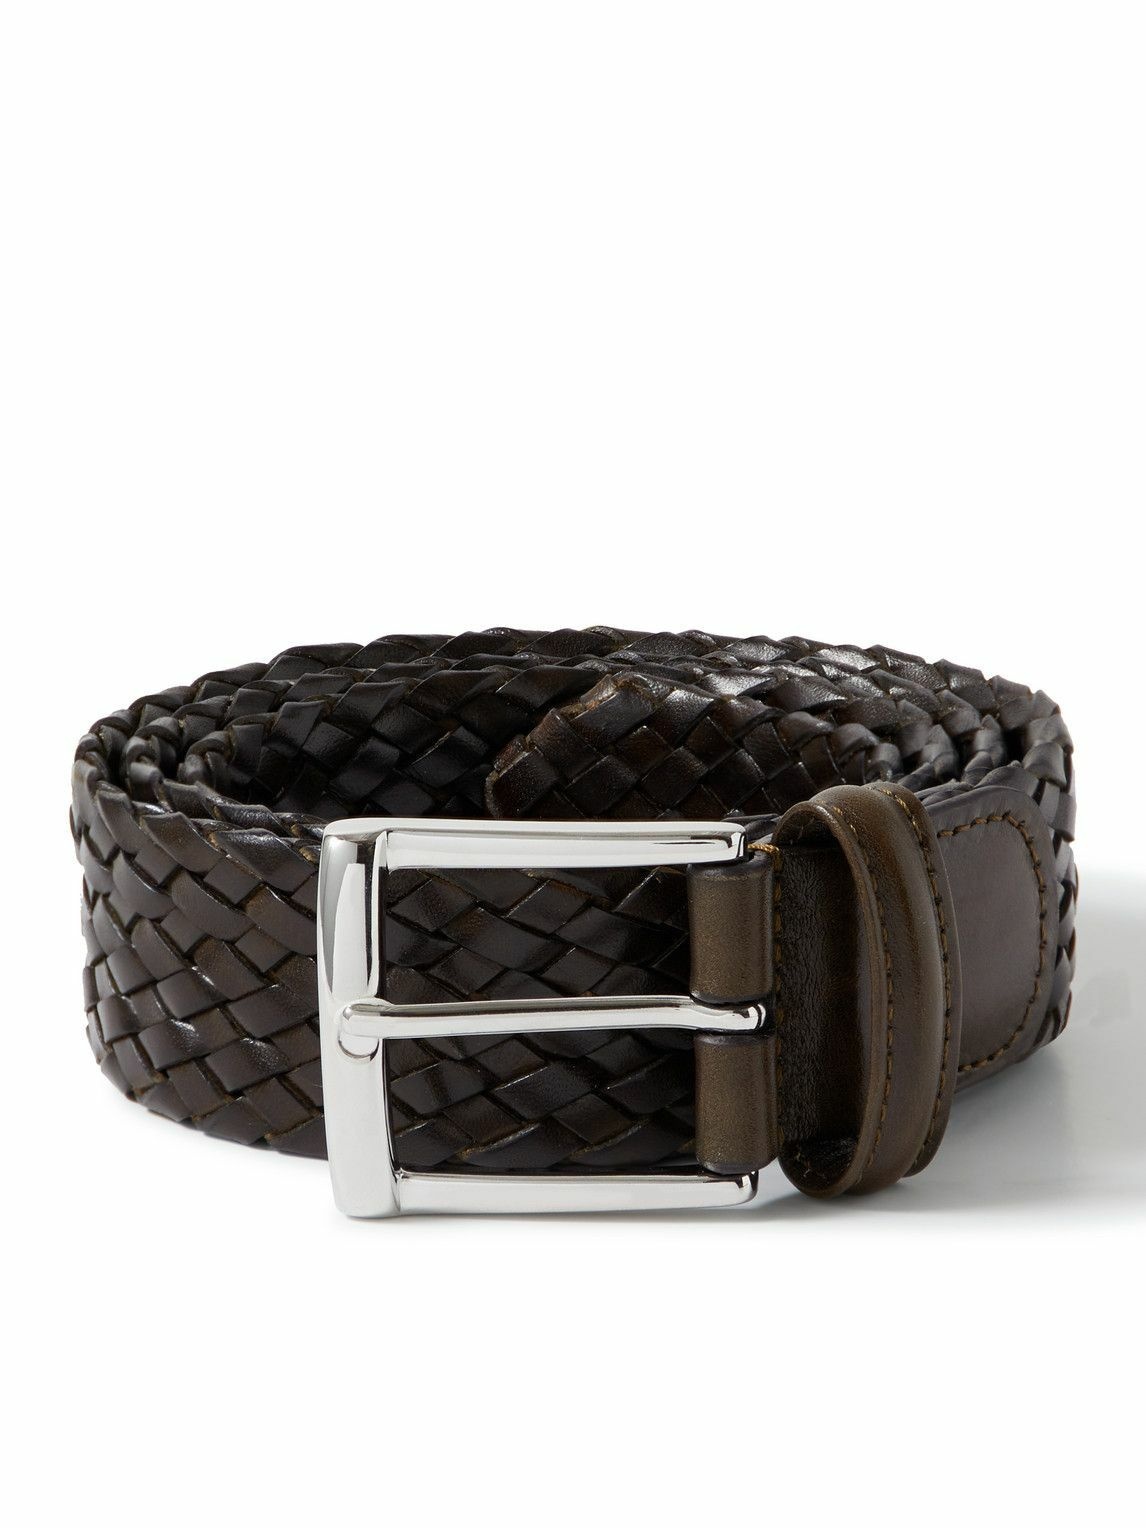 Black Woven leather belt, Anderson's